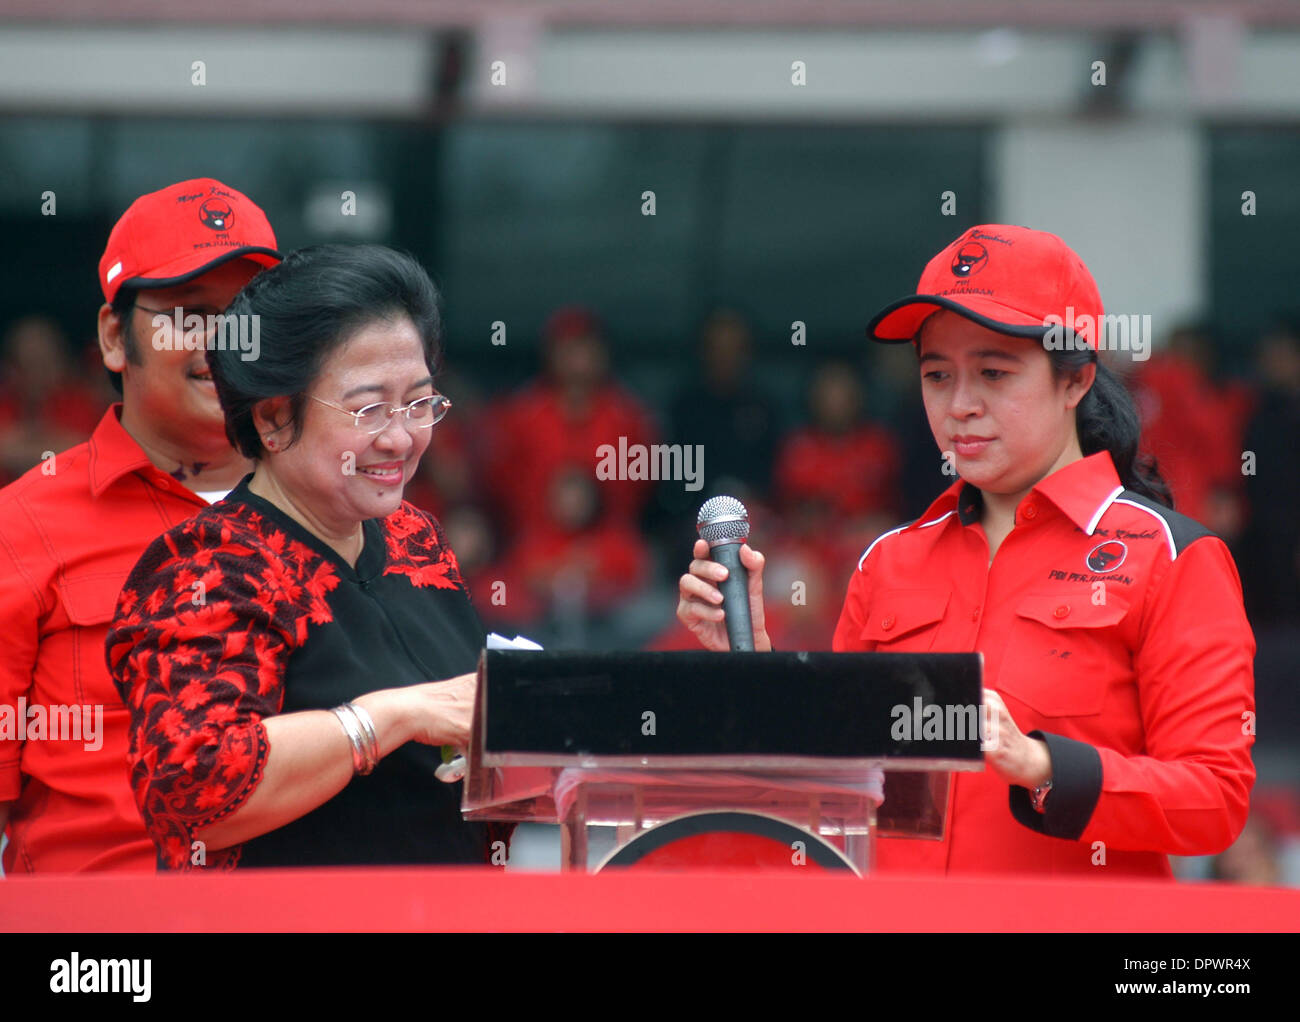 Apr 05, 2009 - Jakarta, Indonesia - Former president and the leader of the Indonesian Democratic Party in Struggle (PDI Perjuangan), MEGAWATI SUKARNO PUTRI  (L) with her daughter PUAN MAHARANI (R) during the campaign in Jakarta, Indonesia, April 4, 2009. Legislative elections for the 128 seats of the Regional Representatives Council and the 560 seats of the People's Representative  Stock Photo